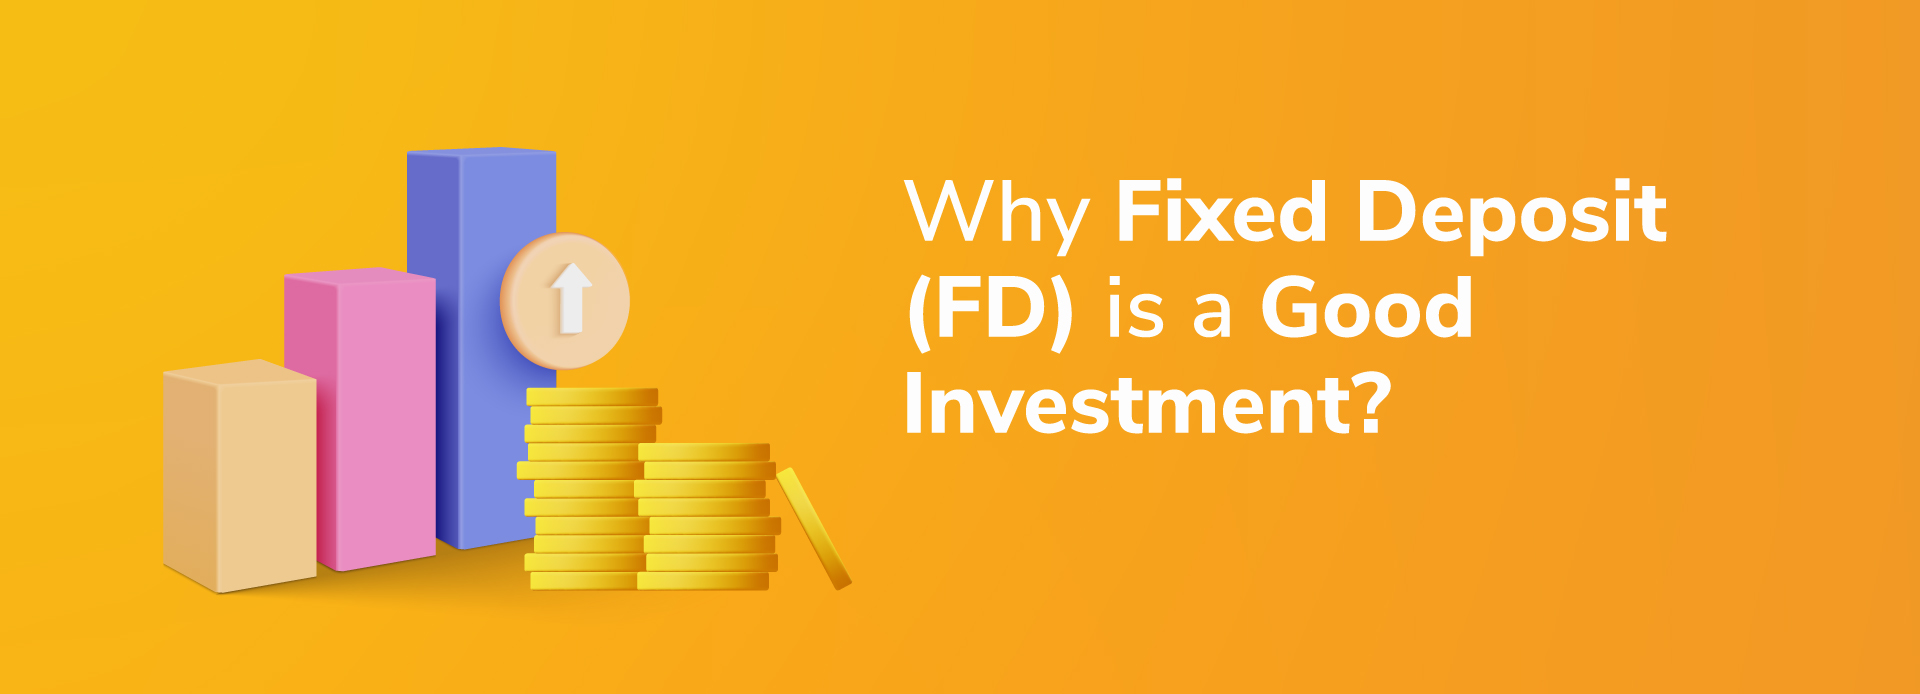 Why a Fixed Deposit is a good investment?